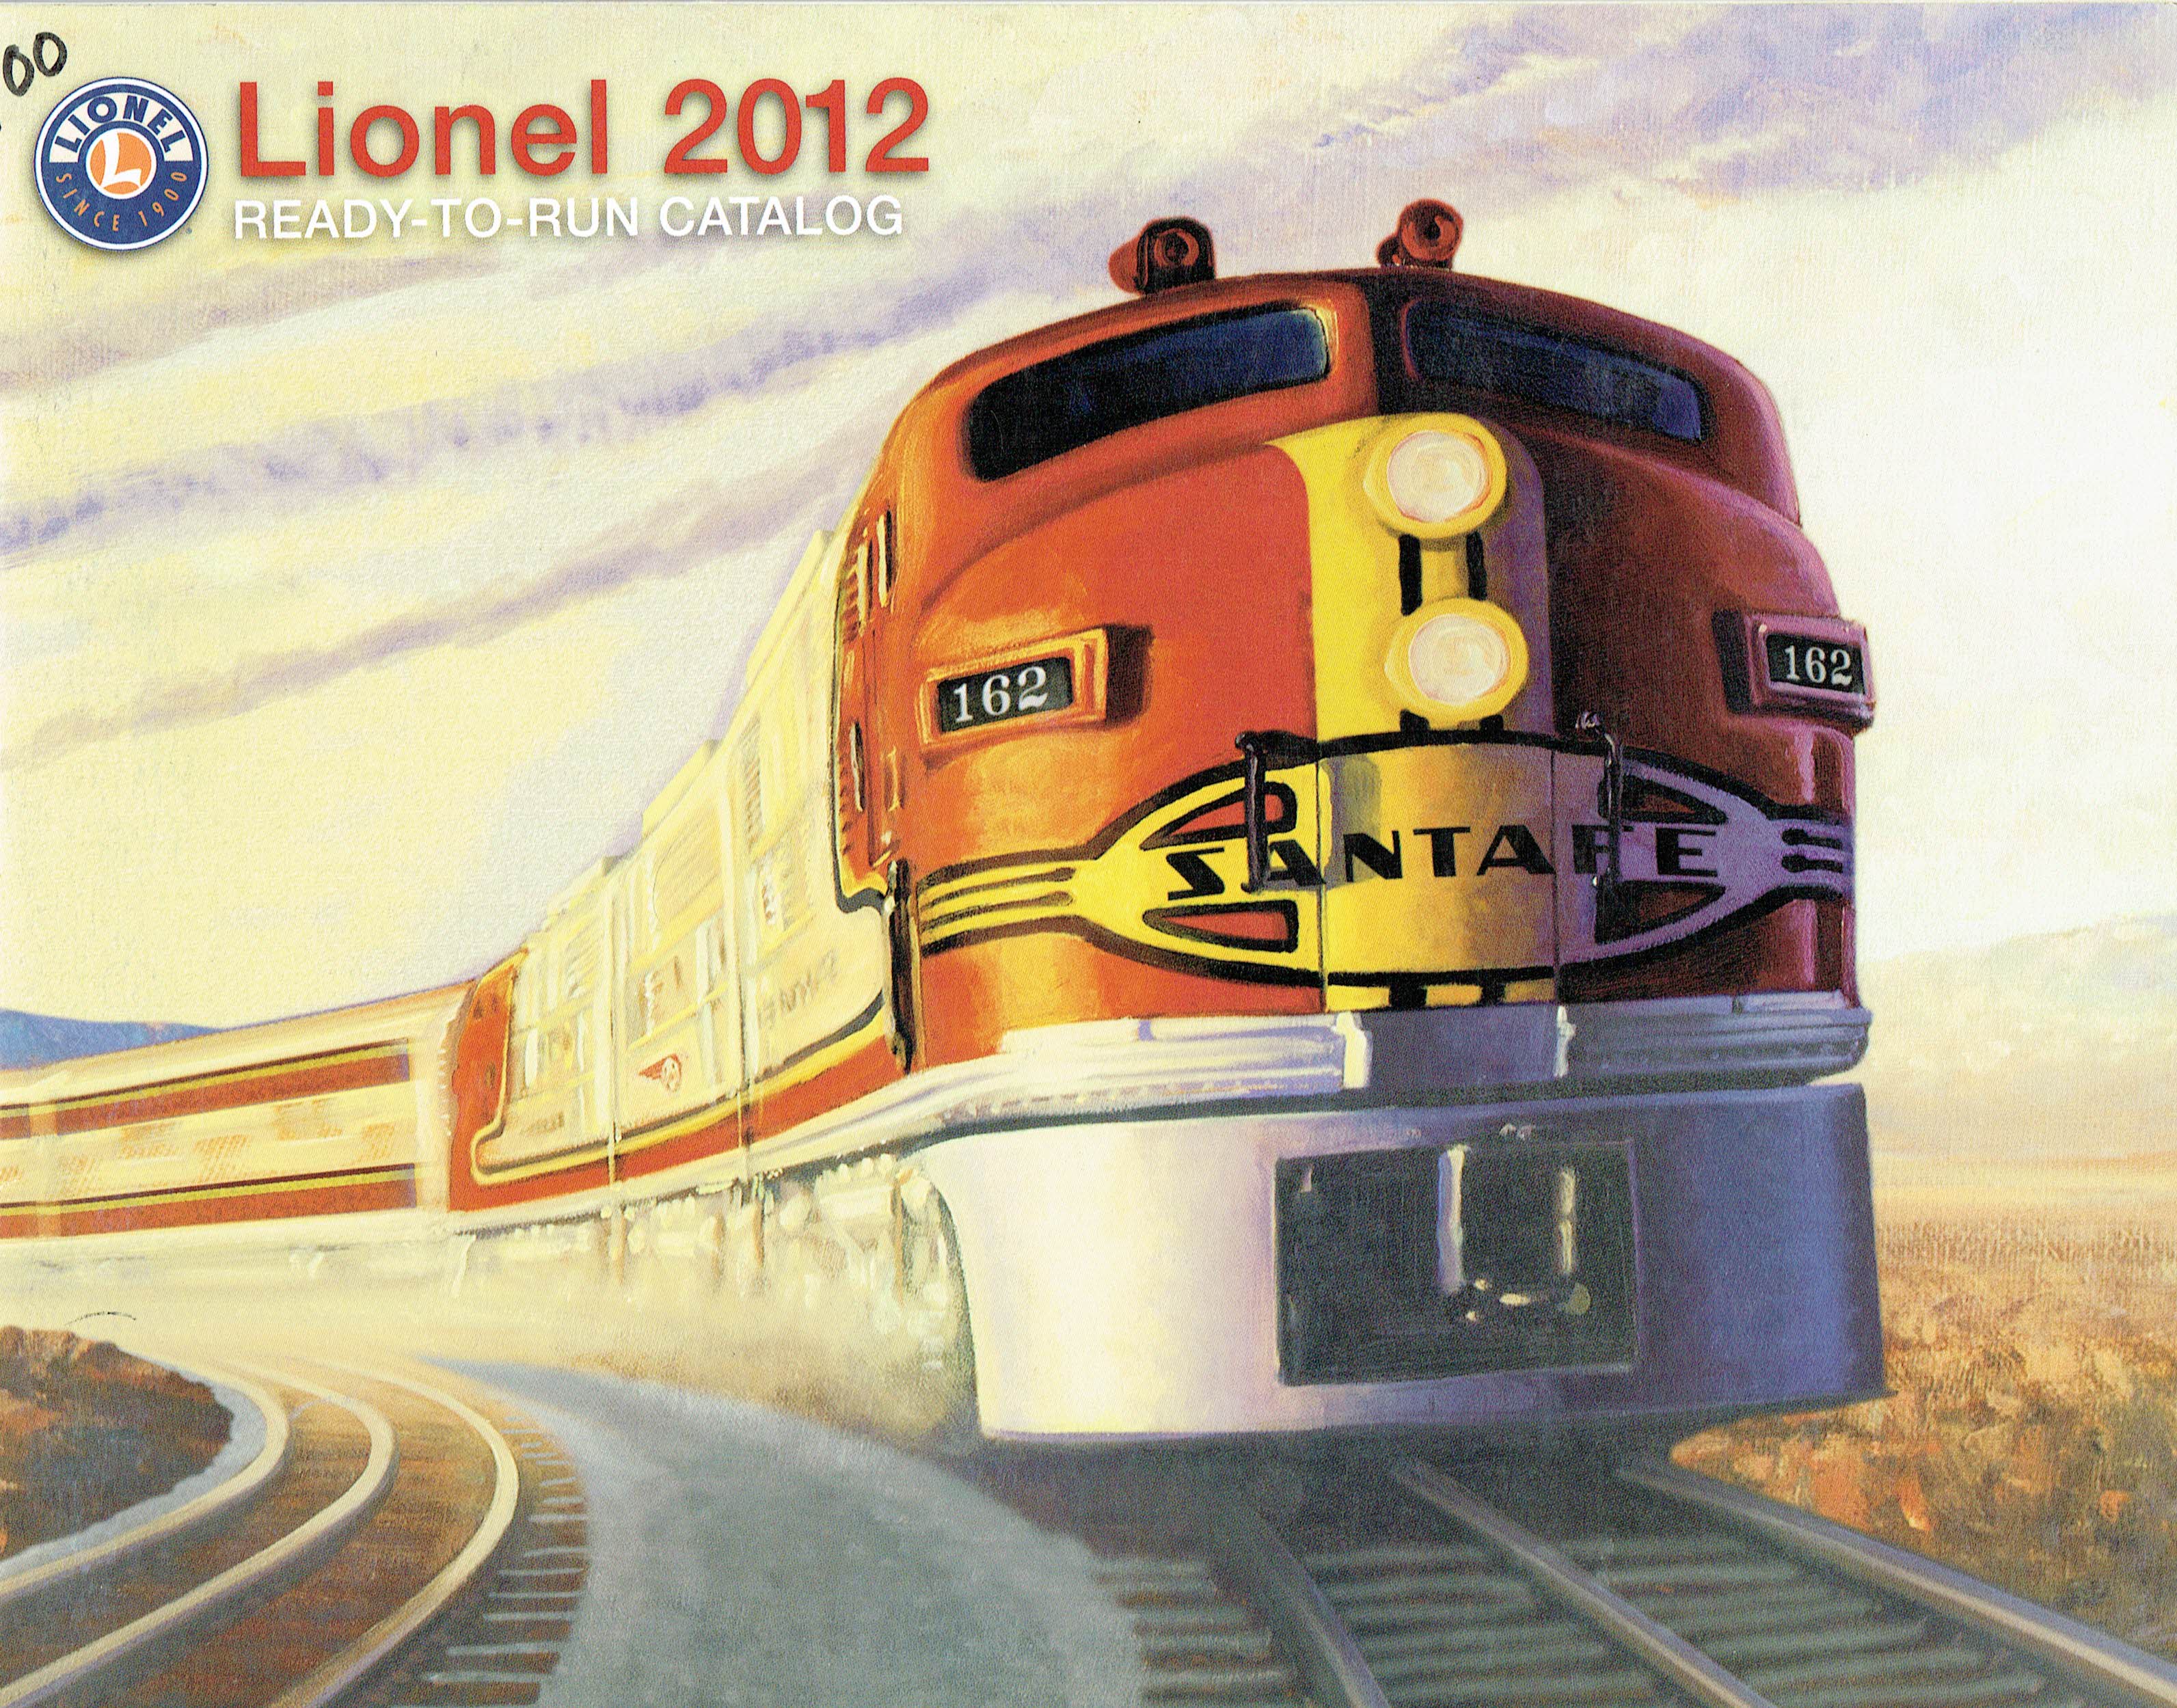 Lionel 2012 Ready-to-Run Catalog image